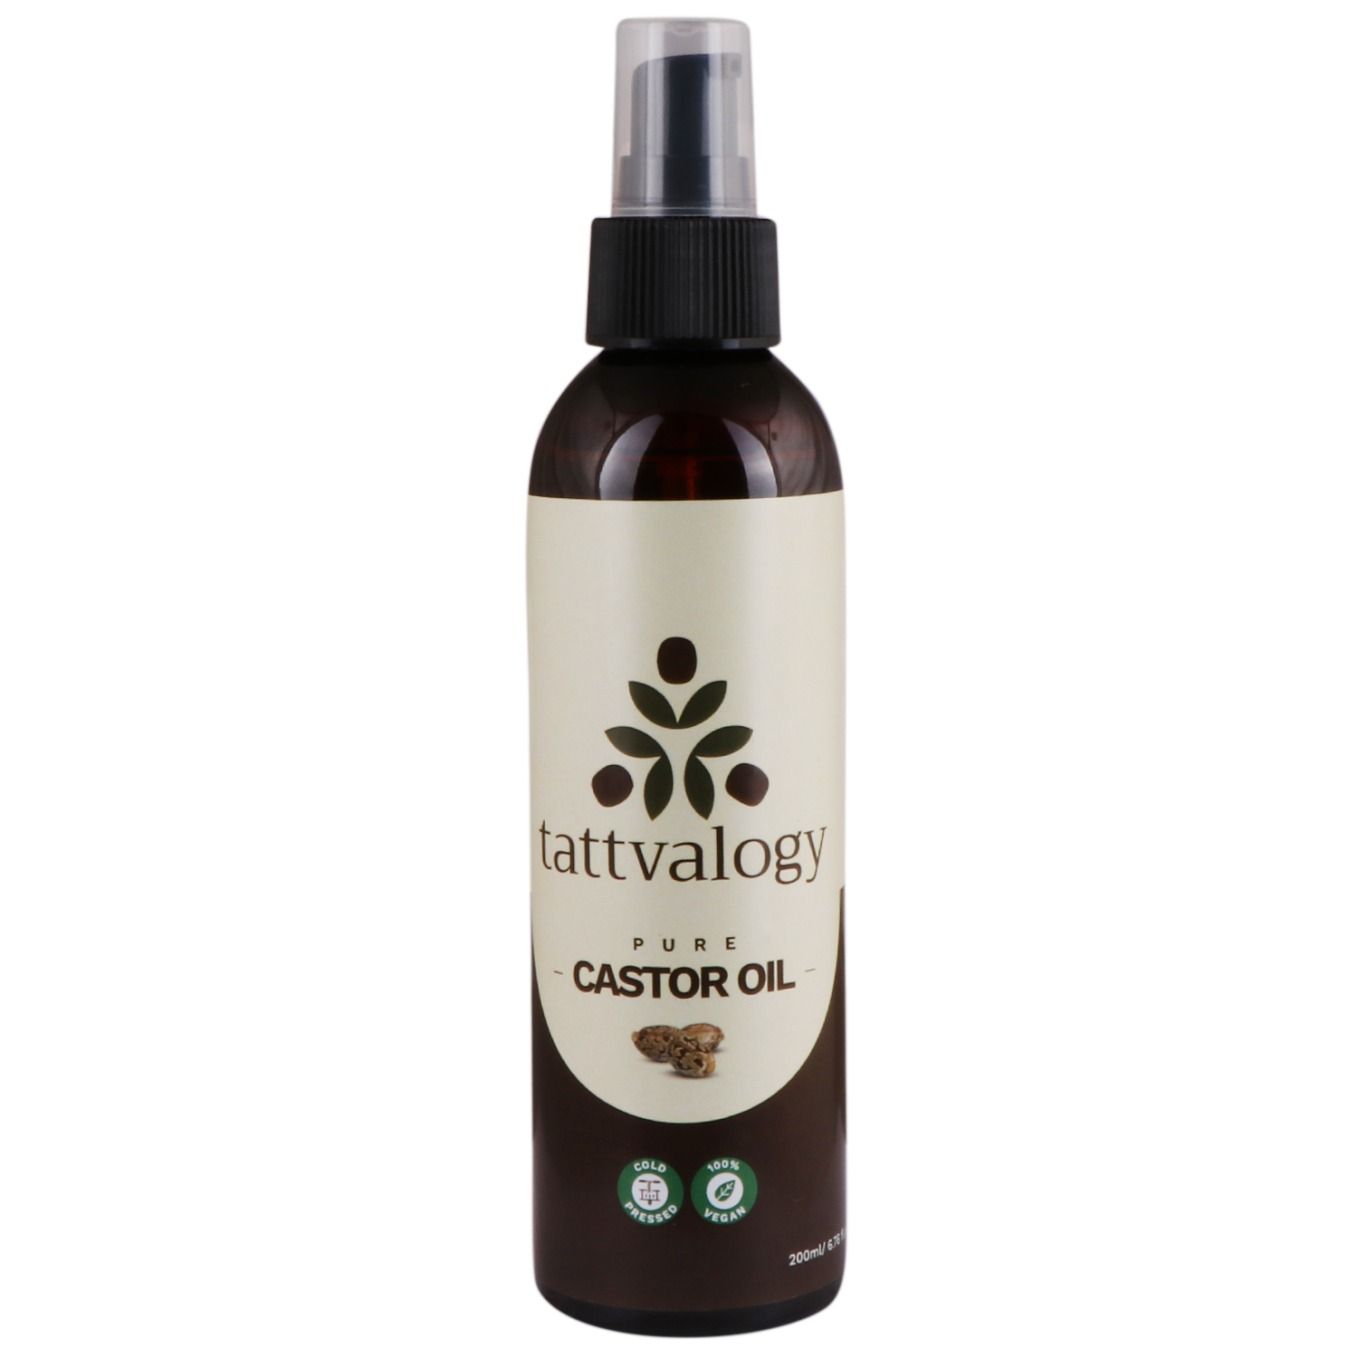 Tattvalogy Castor Oil For Skin & Hair Care- Cold Pressed, 100% Pure & Natural